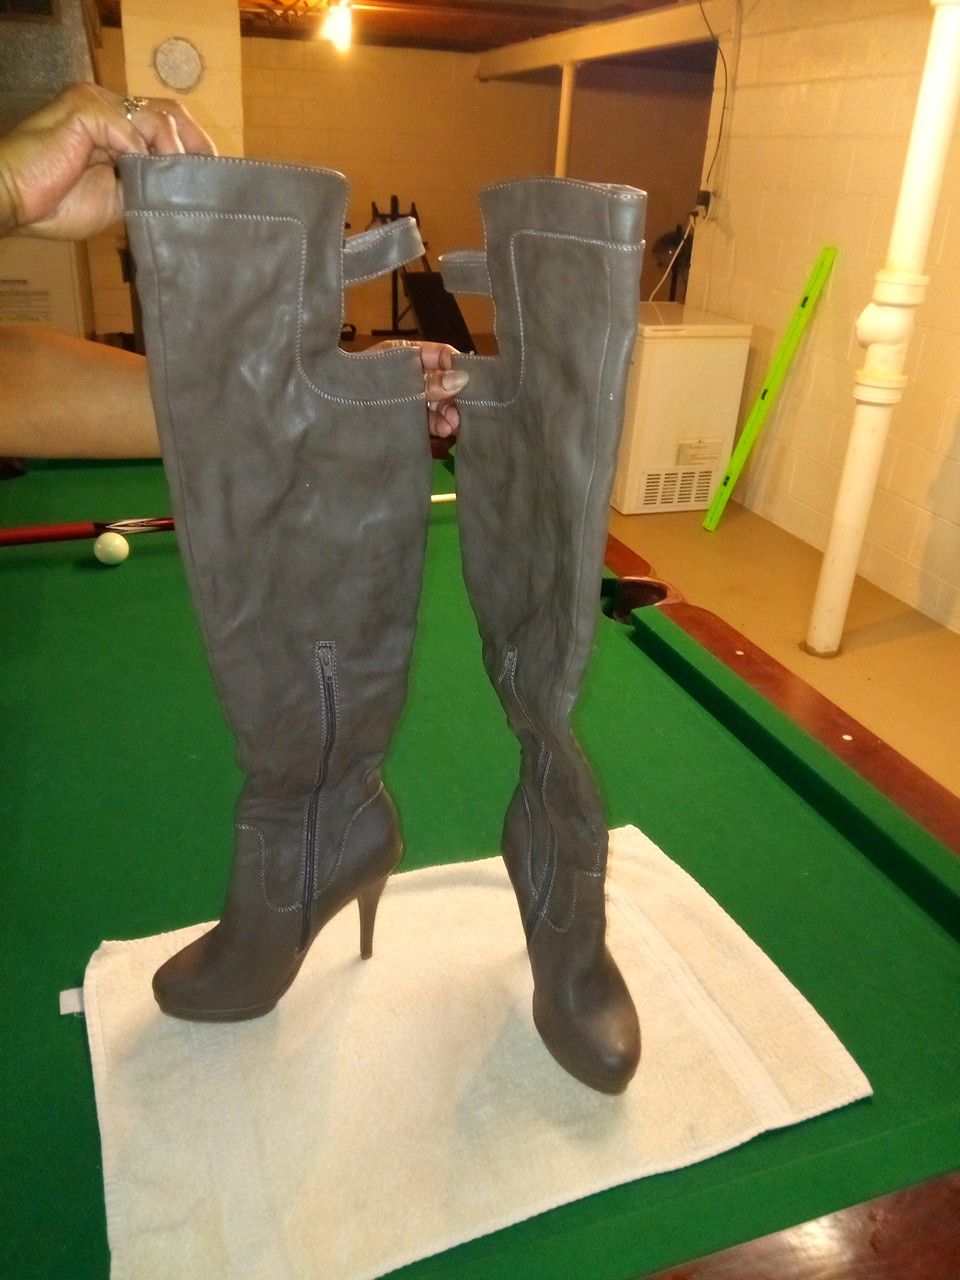 Charlotte Thigh High ladies boots size 7 1/2.